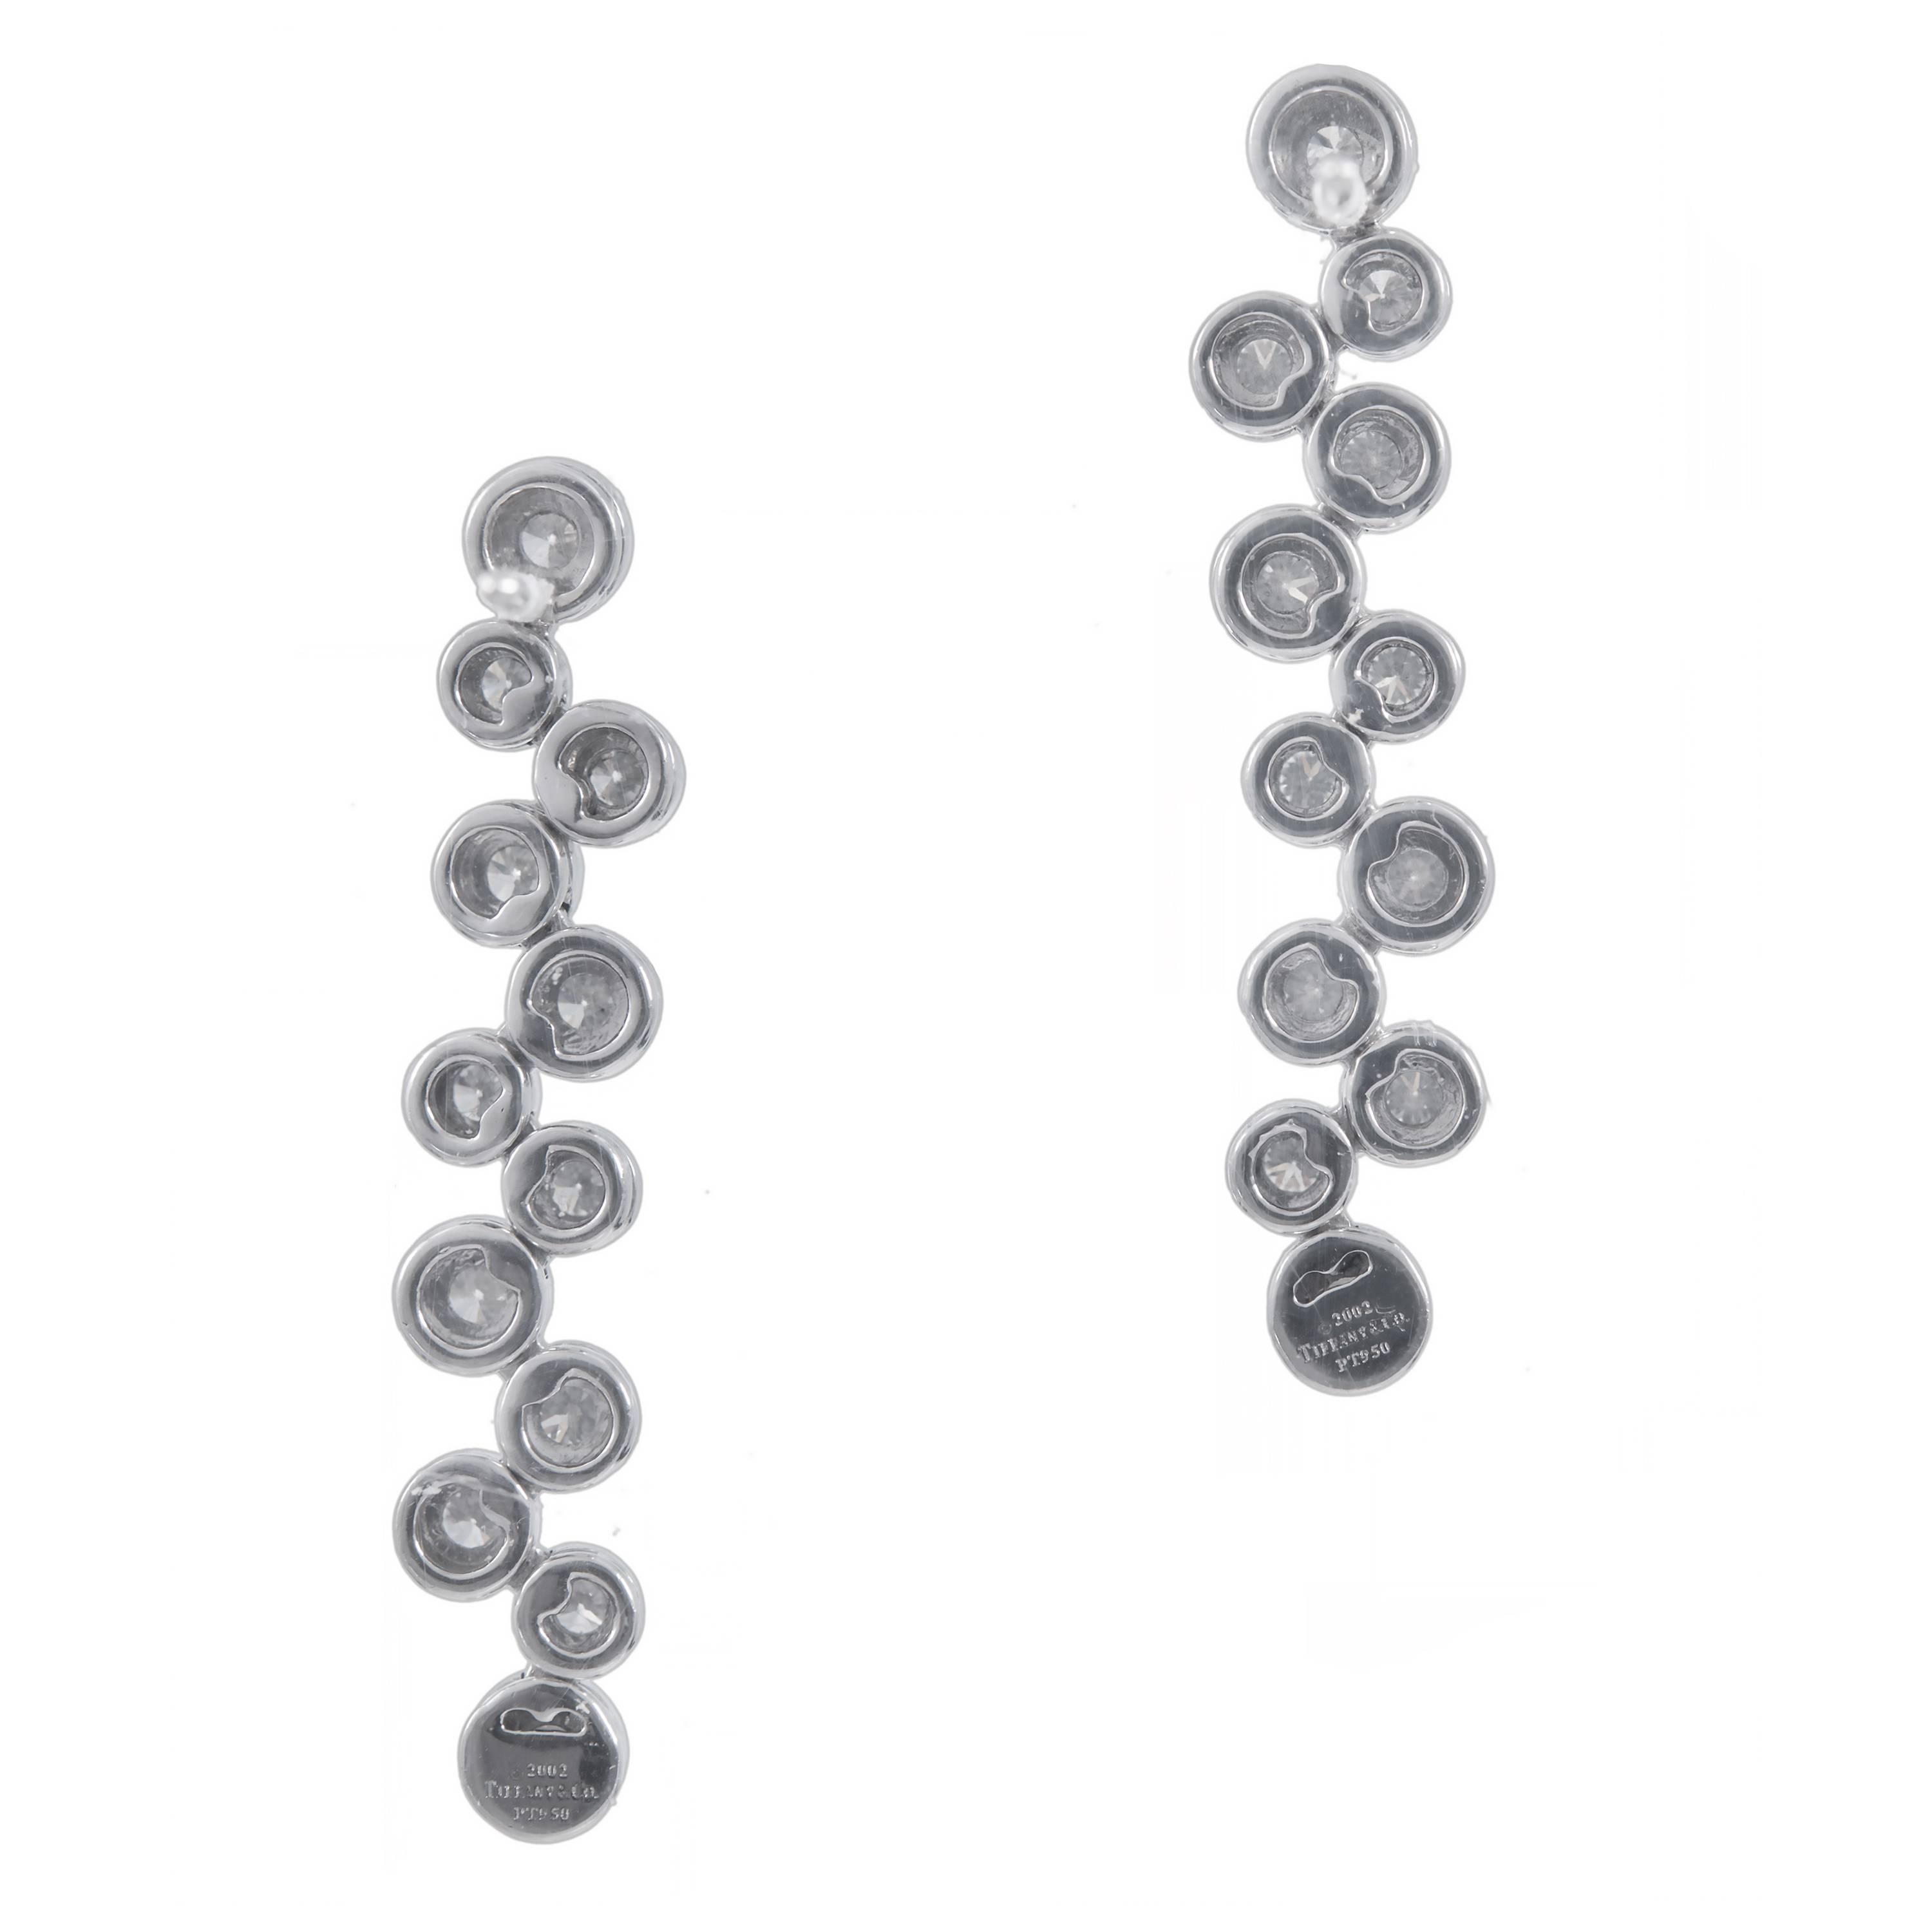 Tiffany & Co dangle flexible Diamond earrings from the “Bubbles” collection, with 2.00cts of fine ideal brilliant cut diamonds. Circa 2002. With Tiffany box.

24 round Ideal cut diamonds, 2.00cts total, F,VVS1 to VS1
Platinum
Tested: